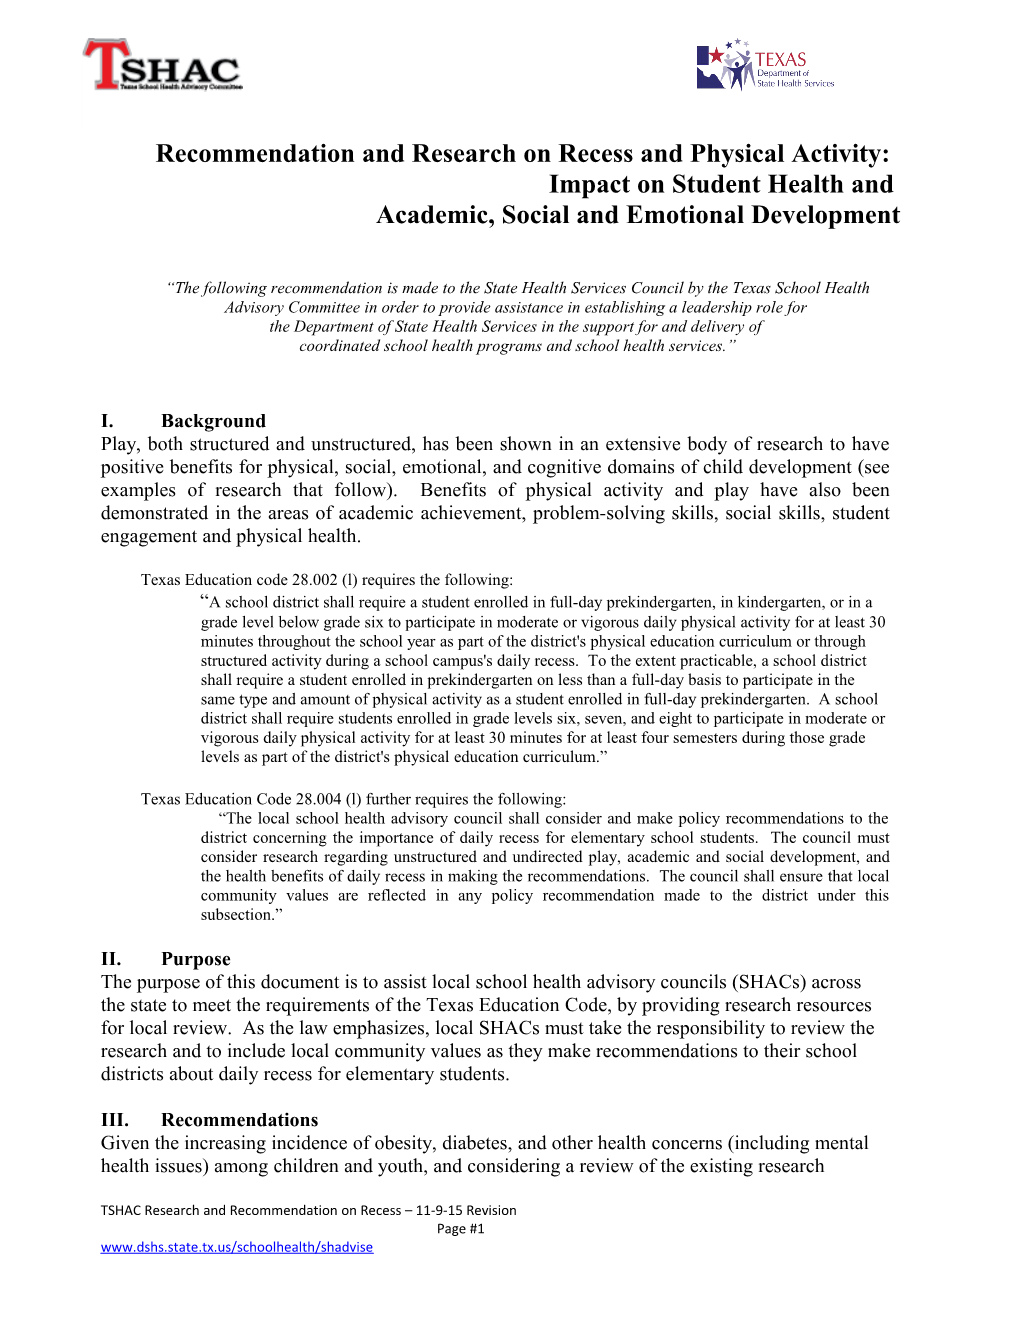 Recommendation and Research on Recess and Physical Activity: Impact on Student Health And